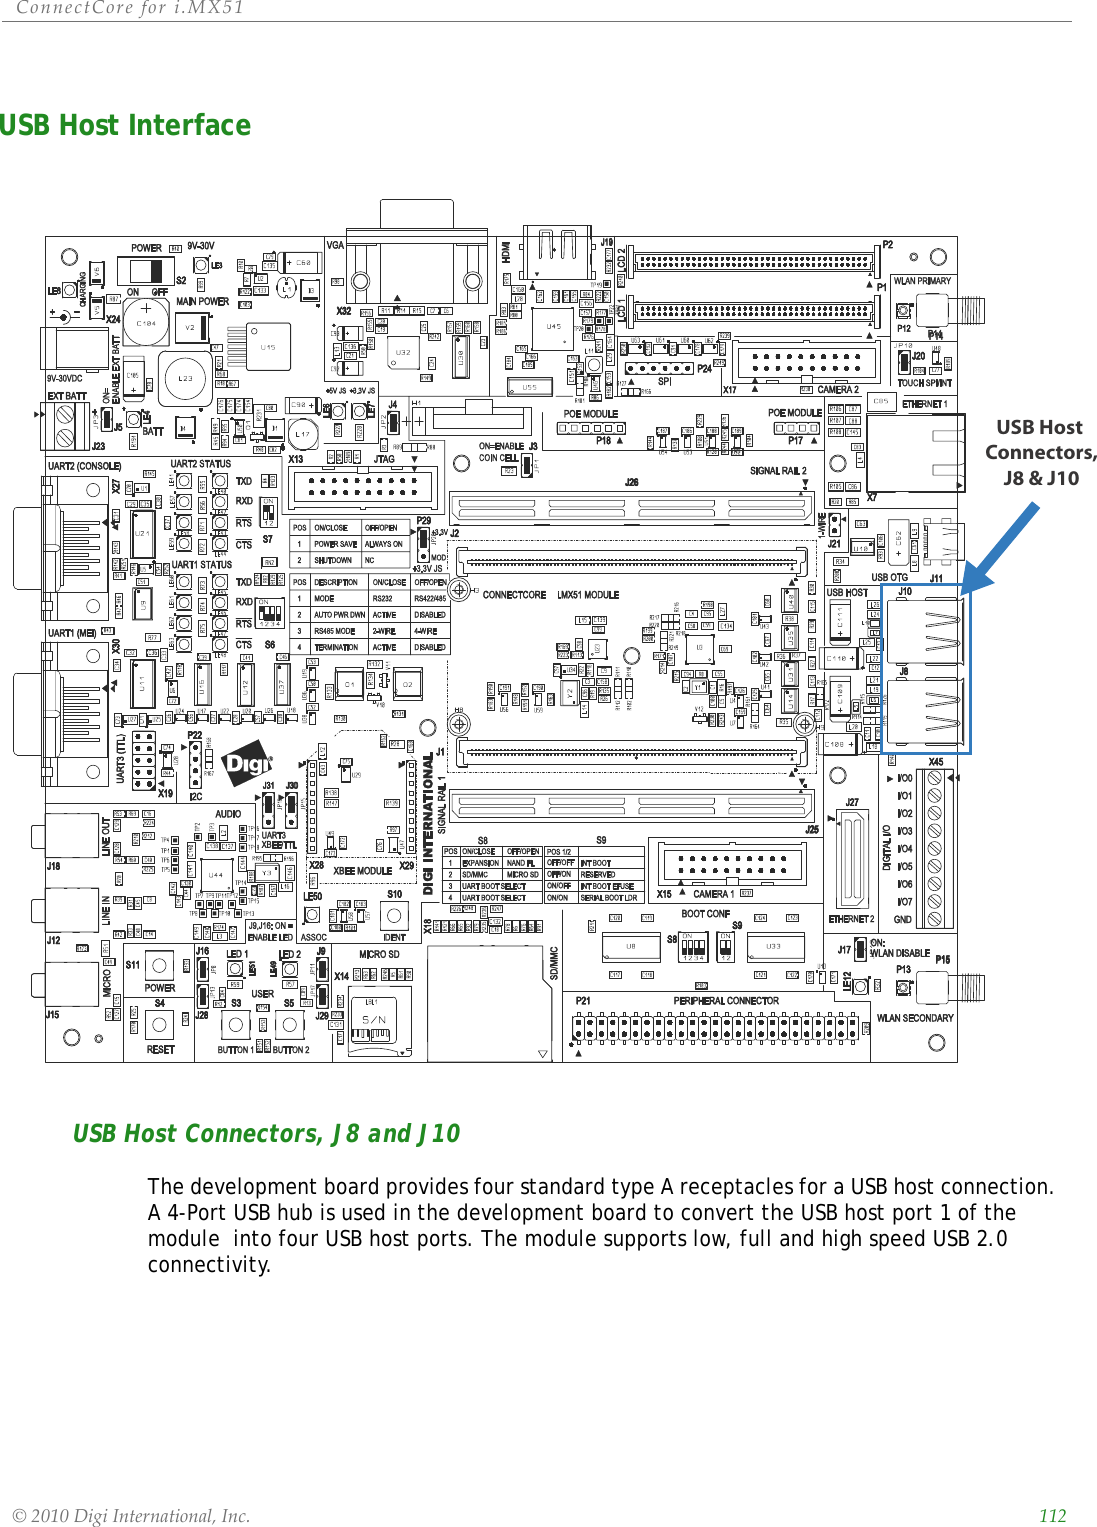 ConnectCorefori.MX51©2010DigiInternational,Inc. 112USB Host InterfaceUSB Host Connectors, J8 and J10The development board provides four standard type A receptacles for a USB host connection. A 4-Port USB hub is used in the development board to convert the USB host port 1 of the module  into four USB host ports. The module supports low, full and high speed USB 2.0 connectivity.USB Host Connectors,J8 &amp; J10